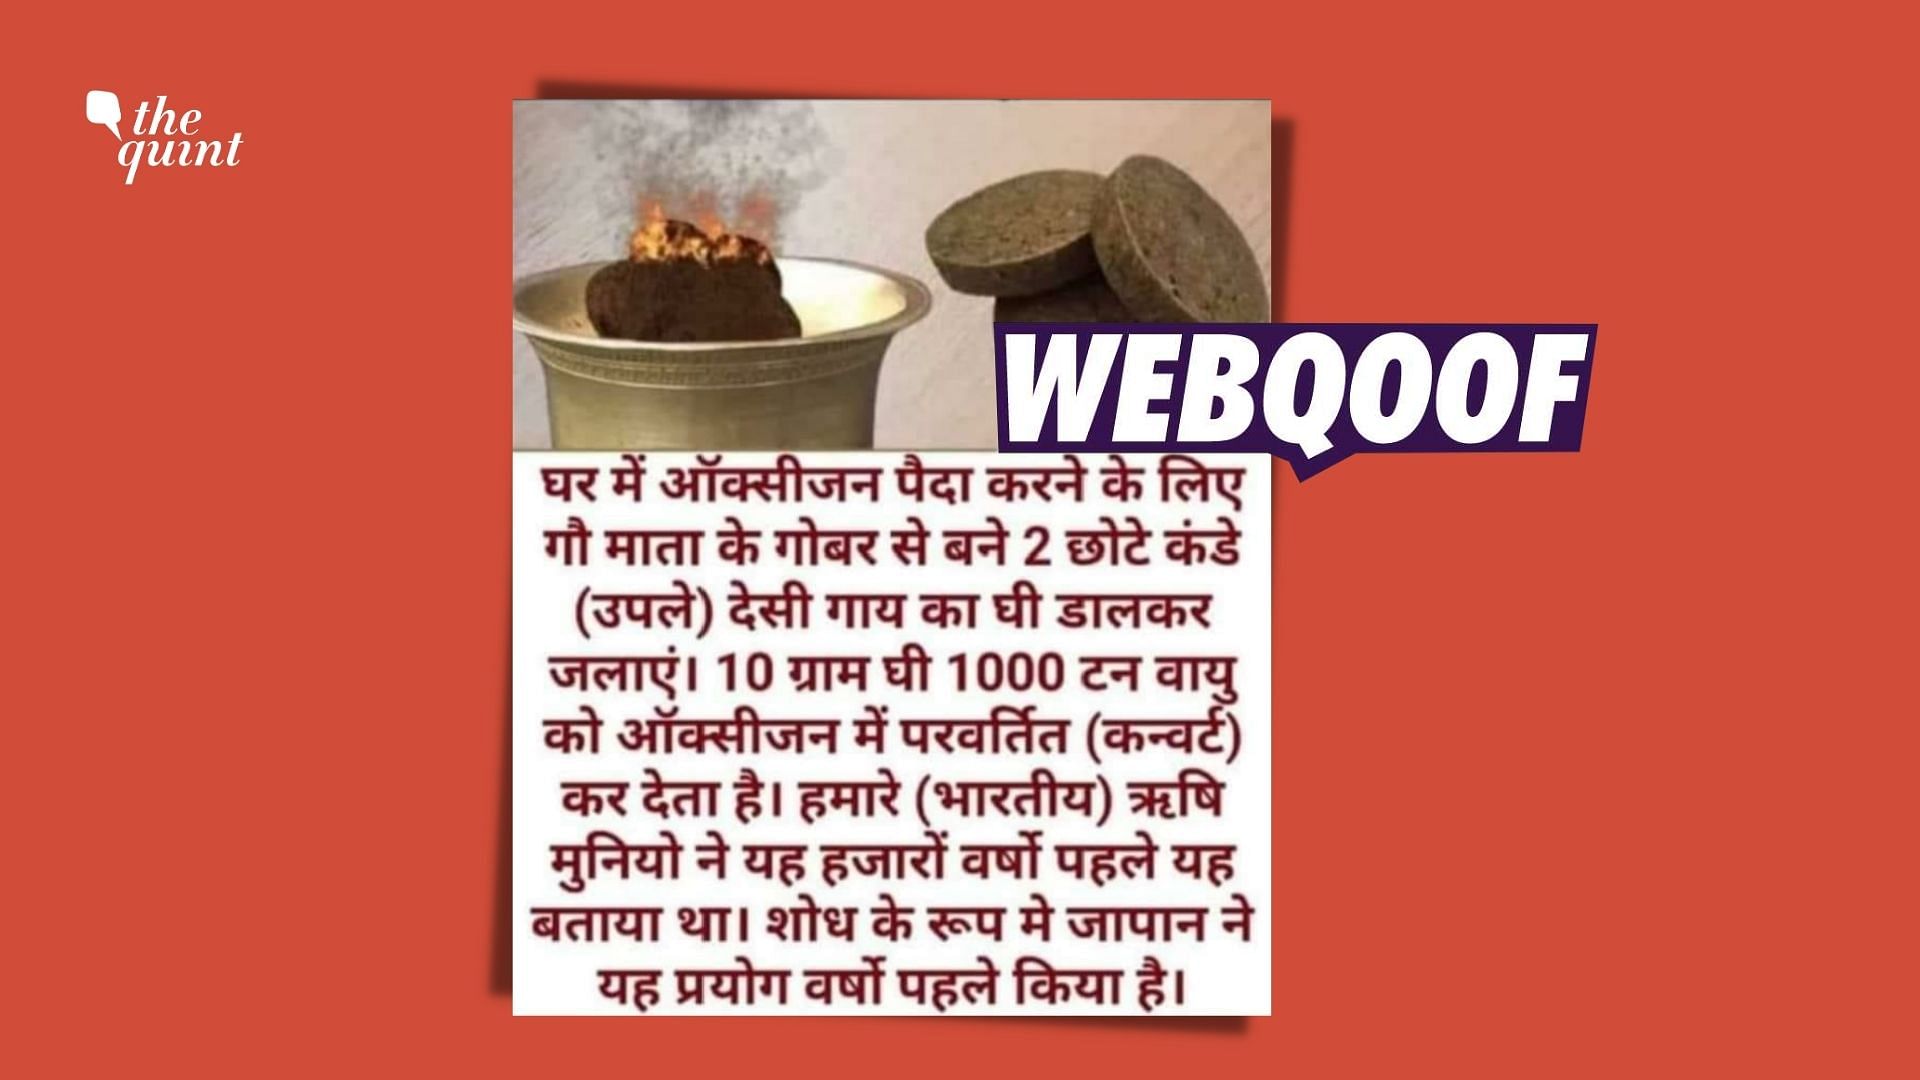 <div class="paragraphs"><p>The viral image falsely claimed that a combination of cow dung and desi ghee, when burnt, can produce oxygen at home.</p></div>